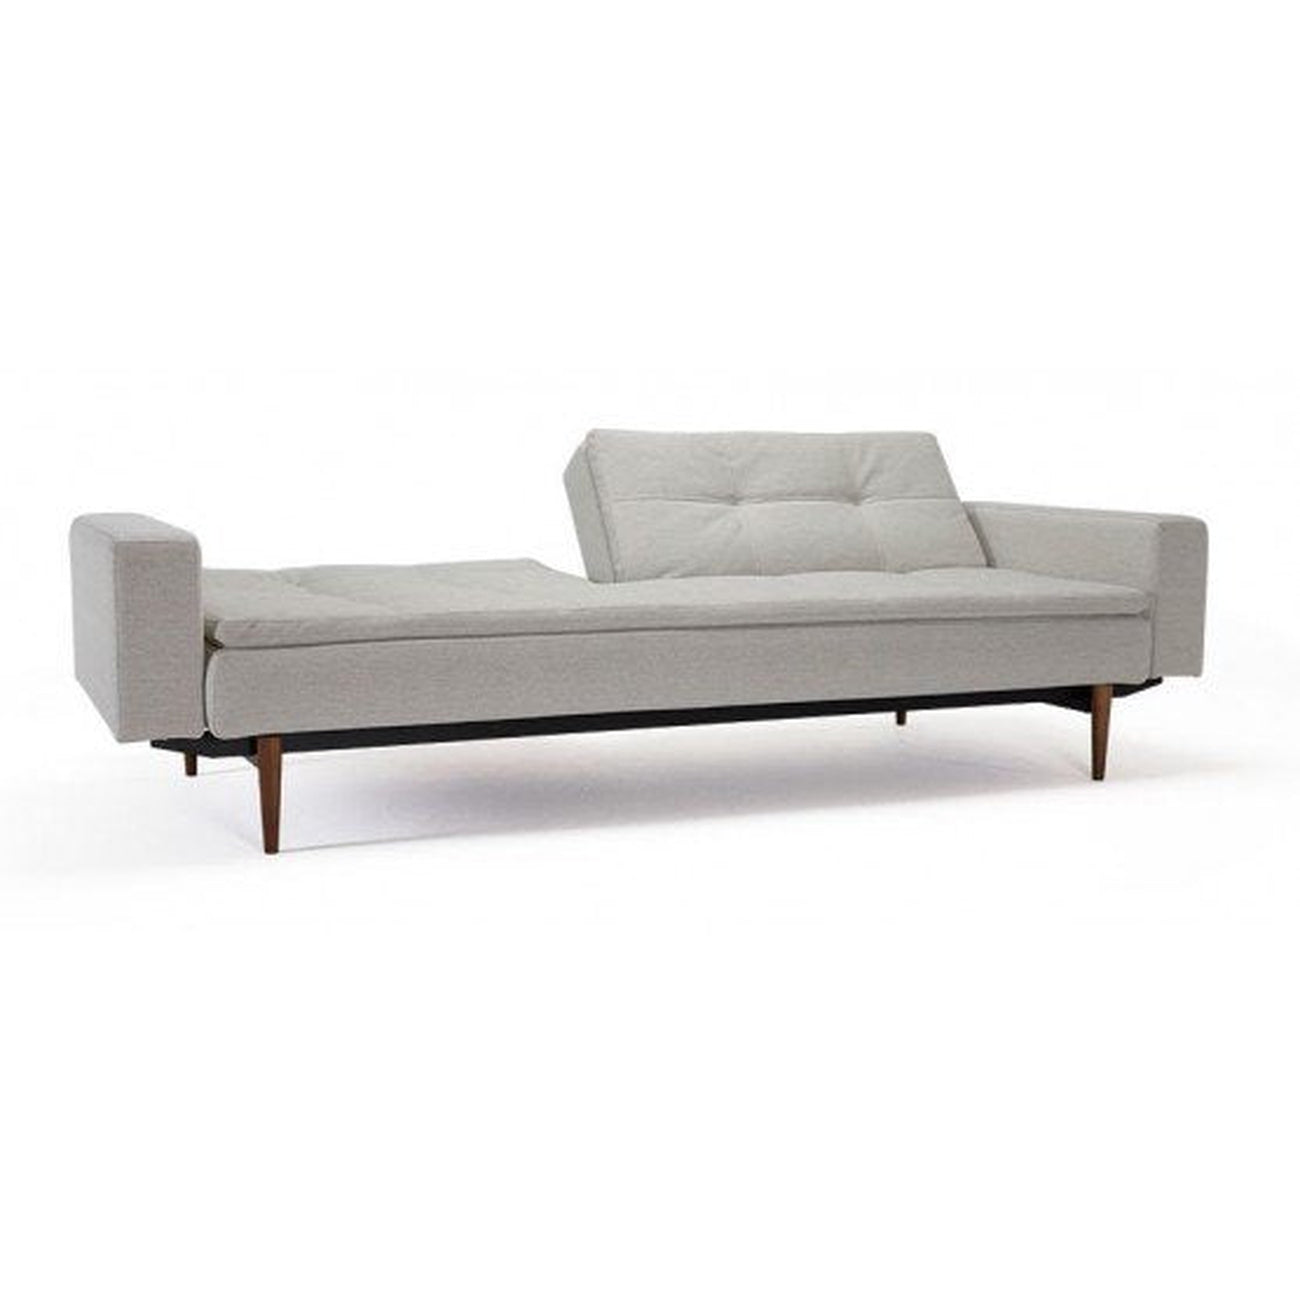 Dublexo Deluxe Sofa W/Arms,DARK WOOD-Innovation Living-INNO-94-741050020527-10-3-SofasMixed Dance Natural-2-France and Son